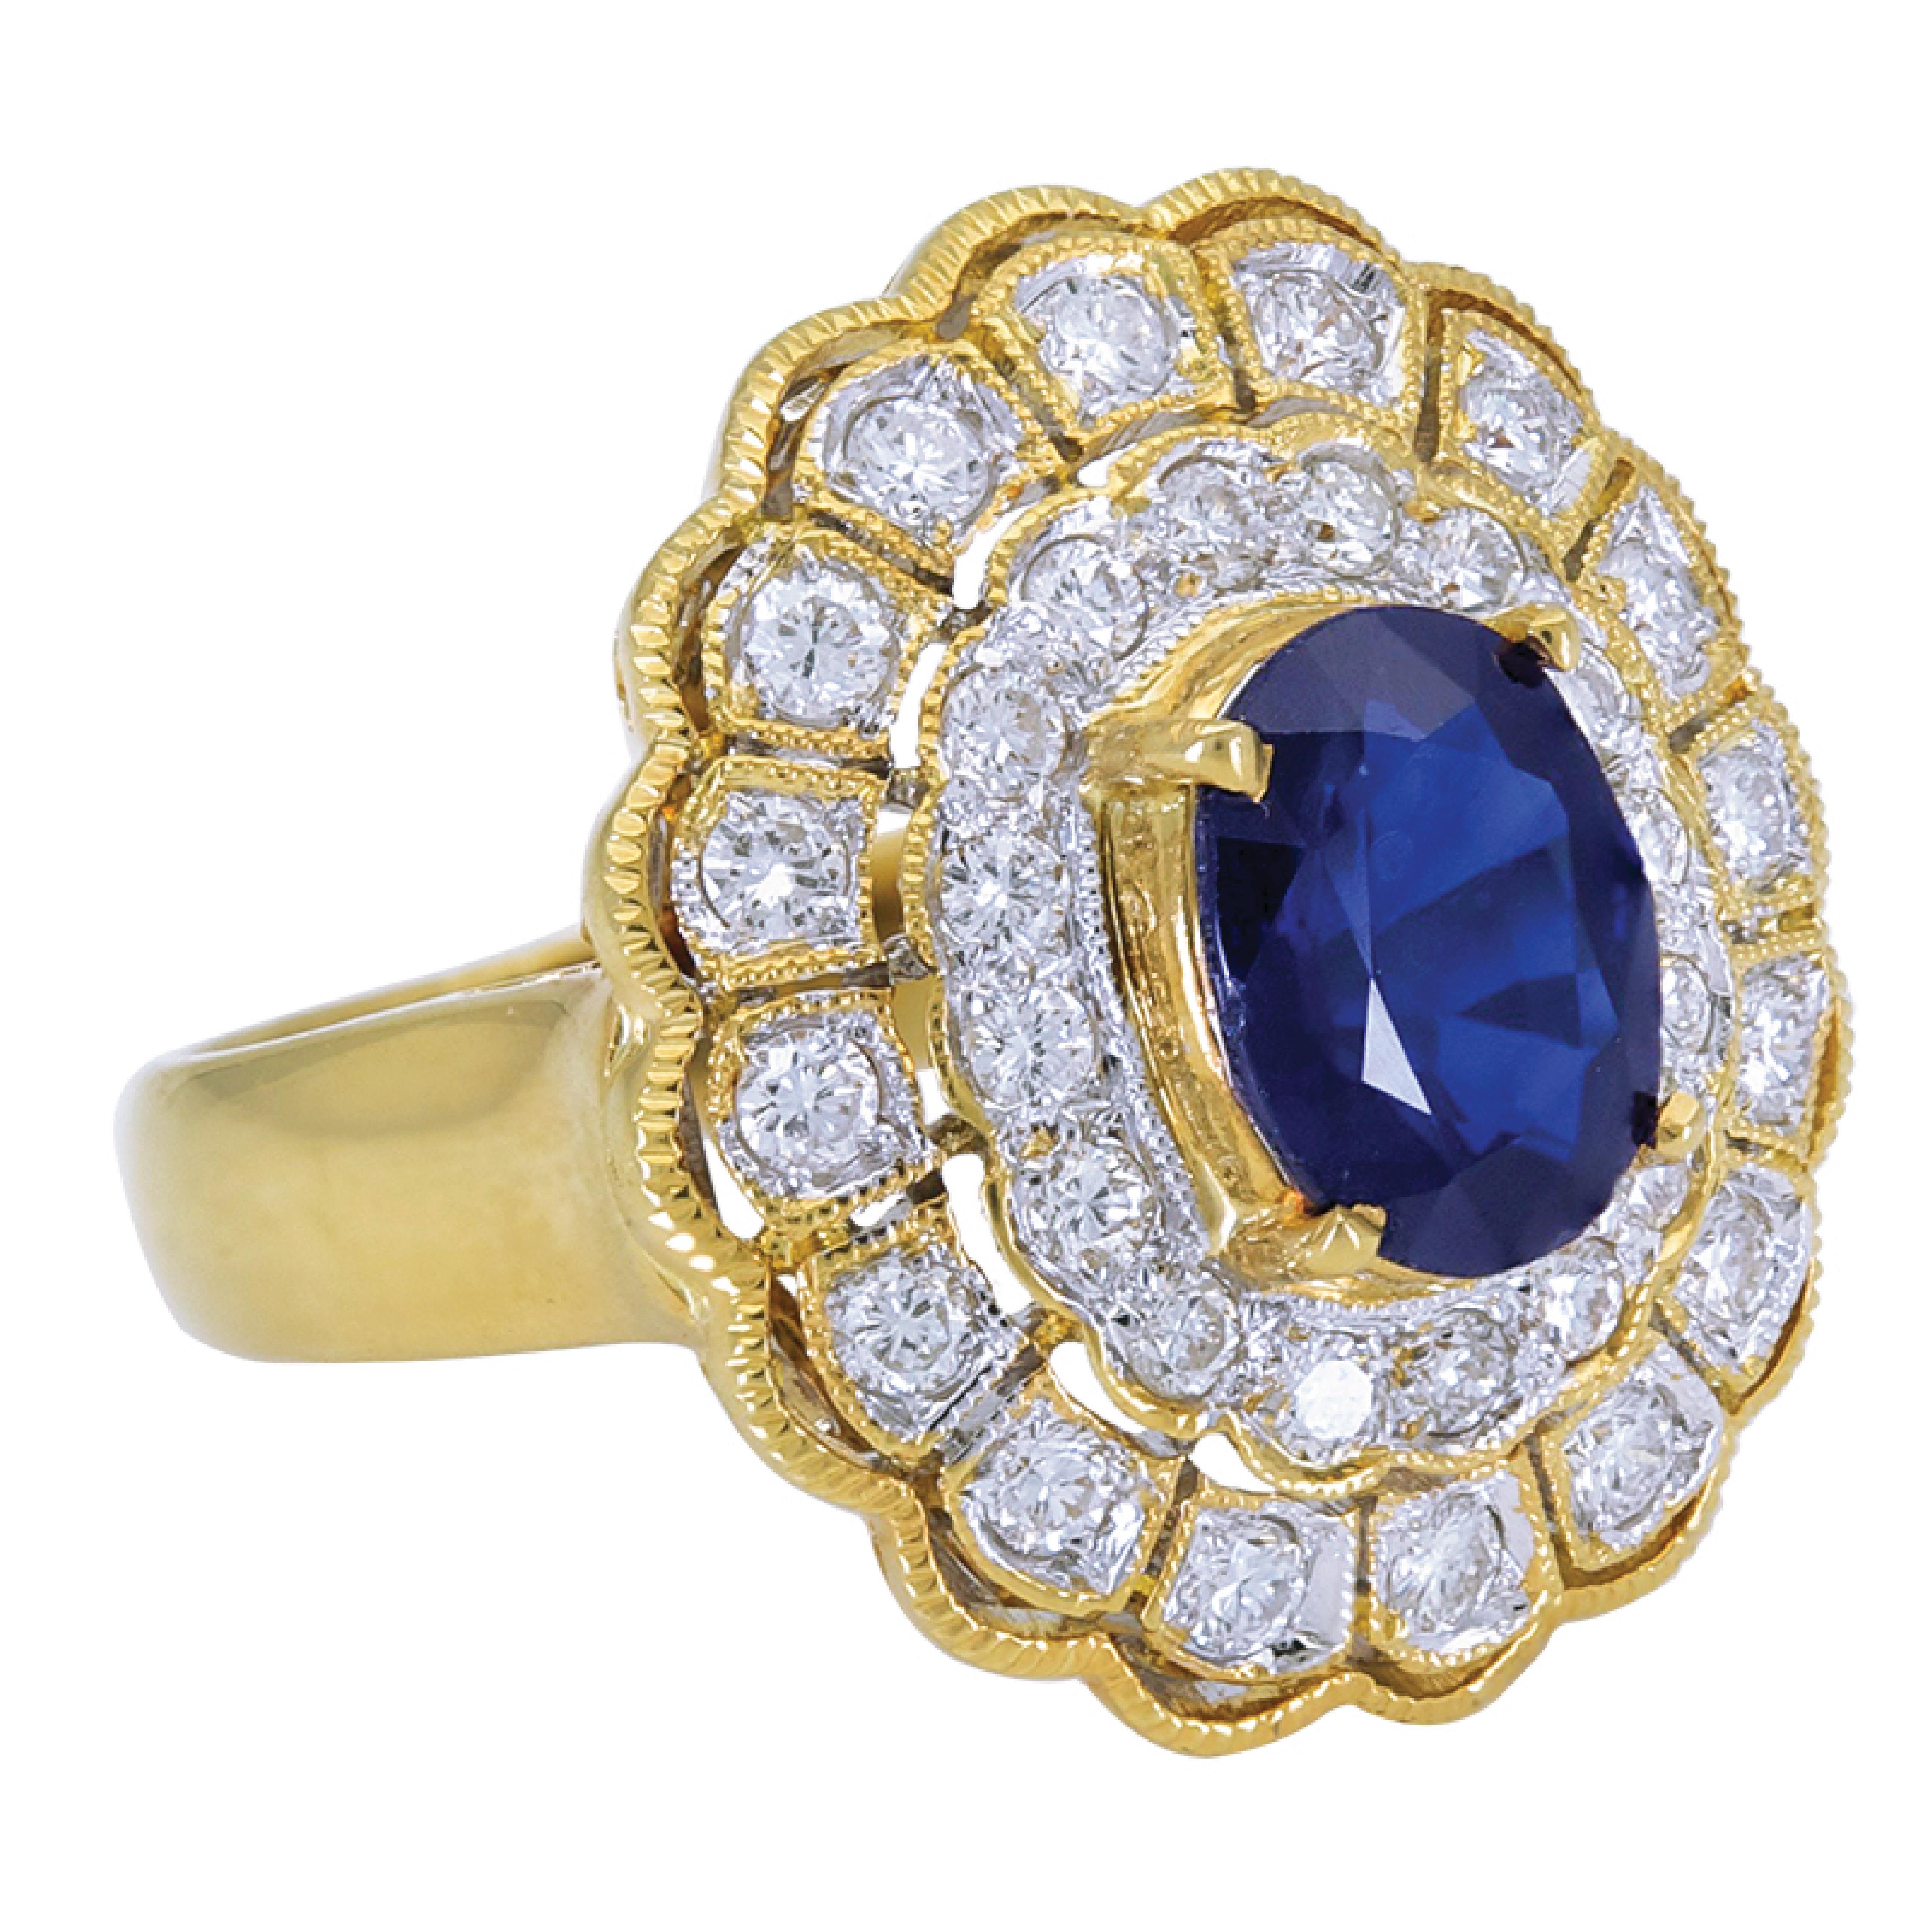 Set in 18 Karat Yellow Gold, this ring is with pave diamonds weighing a total of 1.10 carats with a center oval cut blue sapphire weighing a total of 1.45 carats.

Ring is available for resizing.

Sophia D by Joseph Dardashti LTD has been known